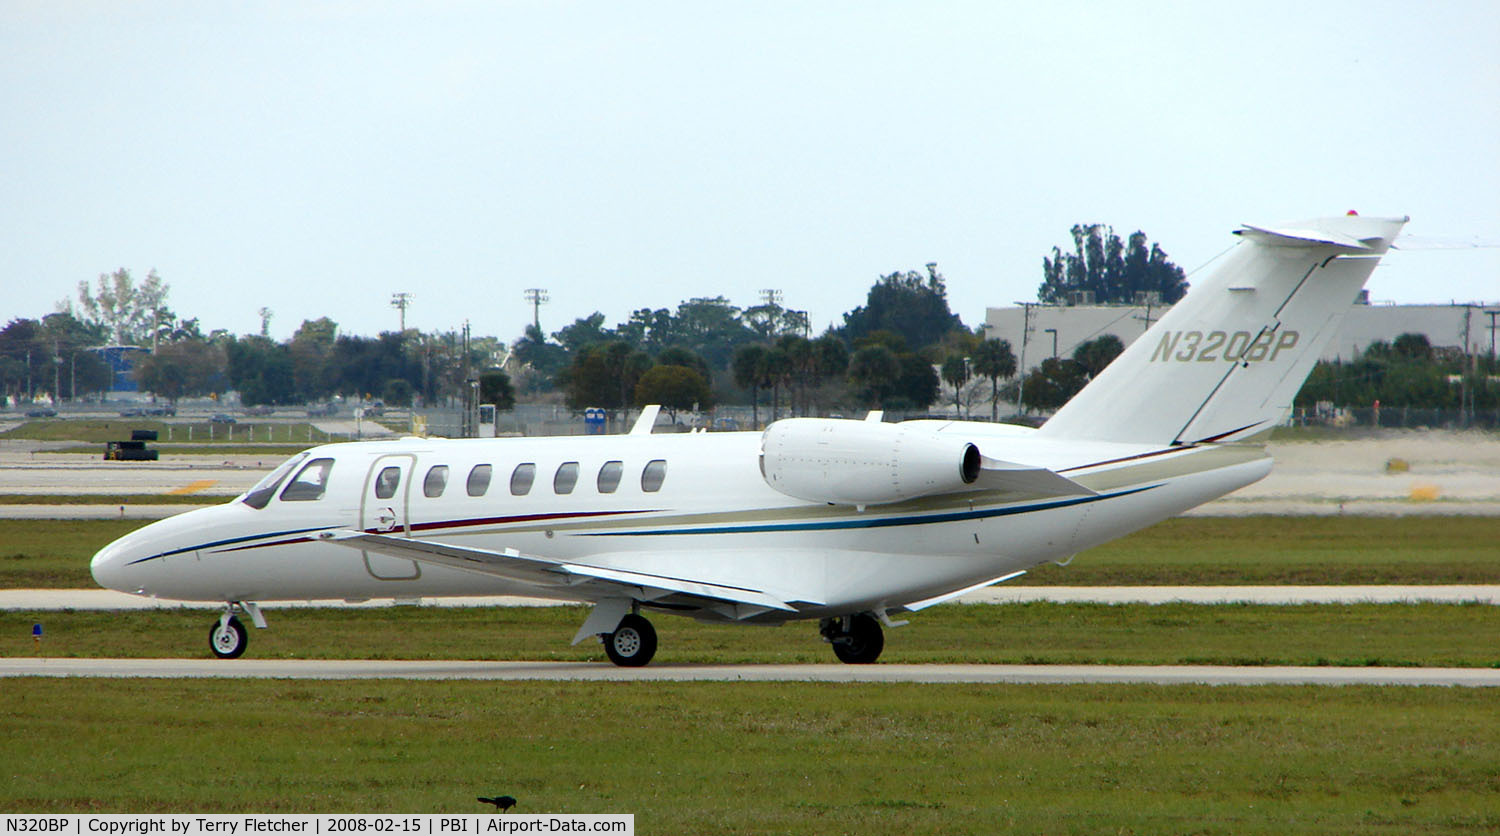 N320BP, 2007 Cessna 525B C/N 525B0143, The business aircraft traffic at West Palm Beach on the Friday before President's Day always provides the aviation enthusiast / photographer with a treat